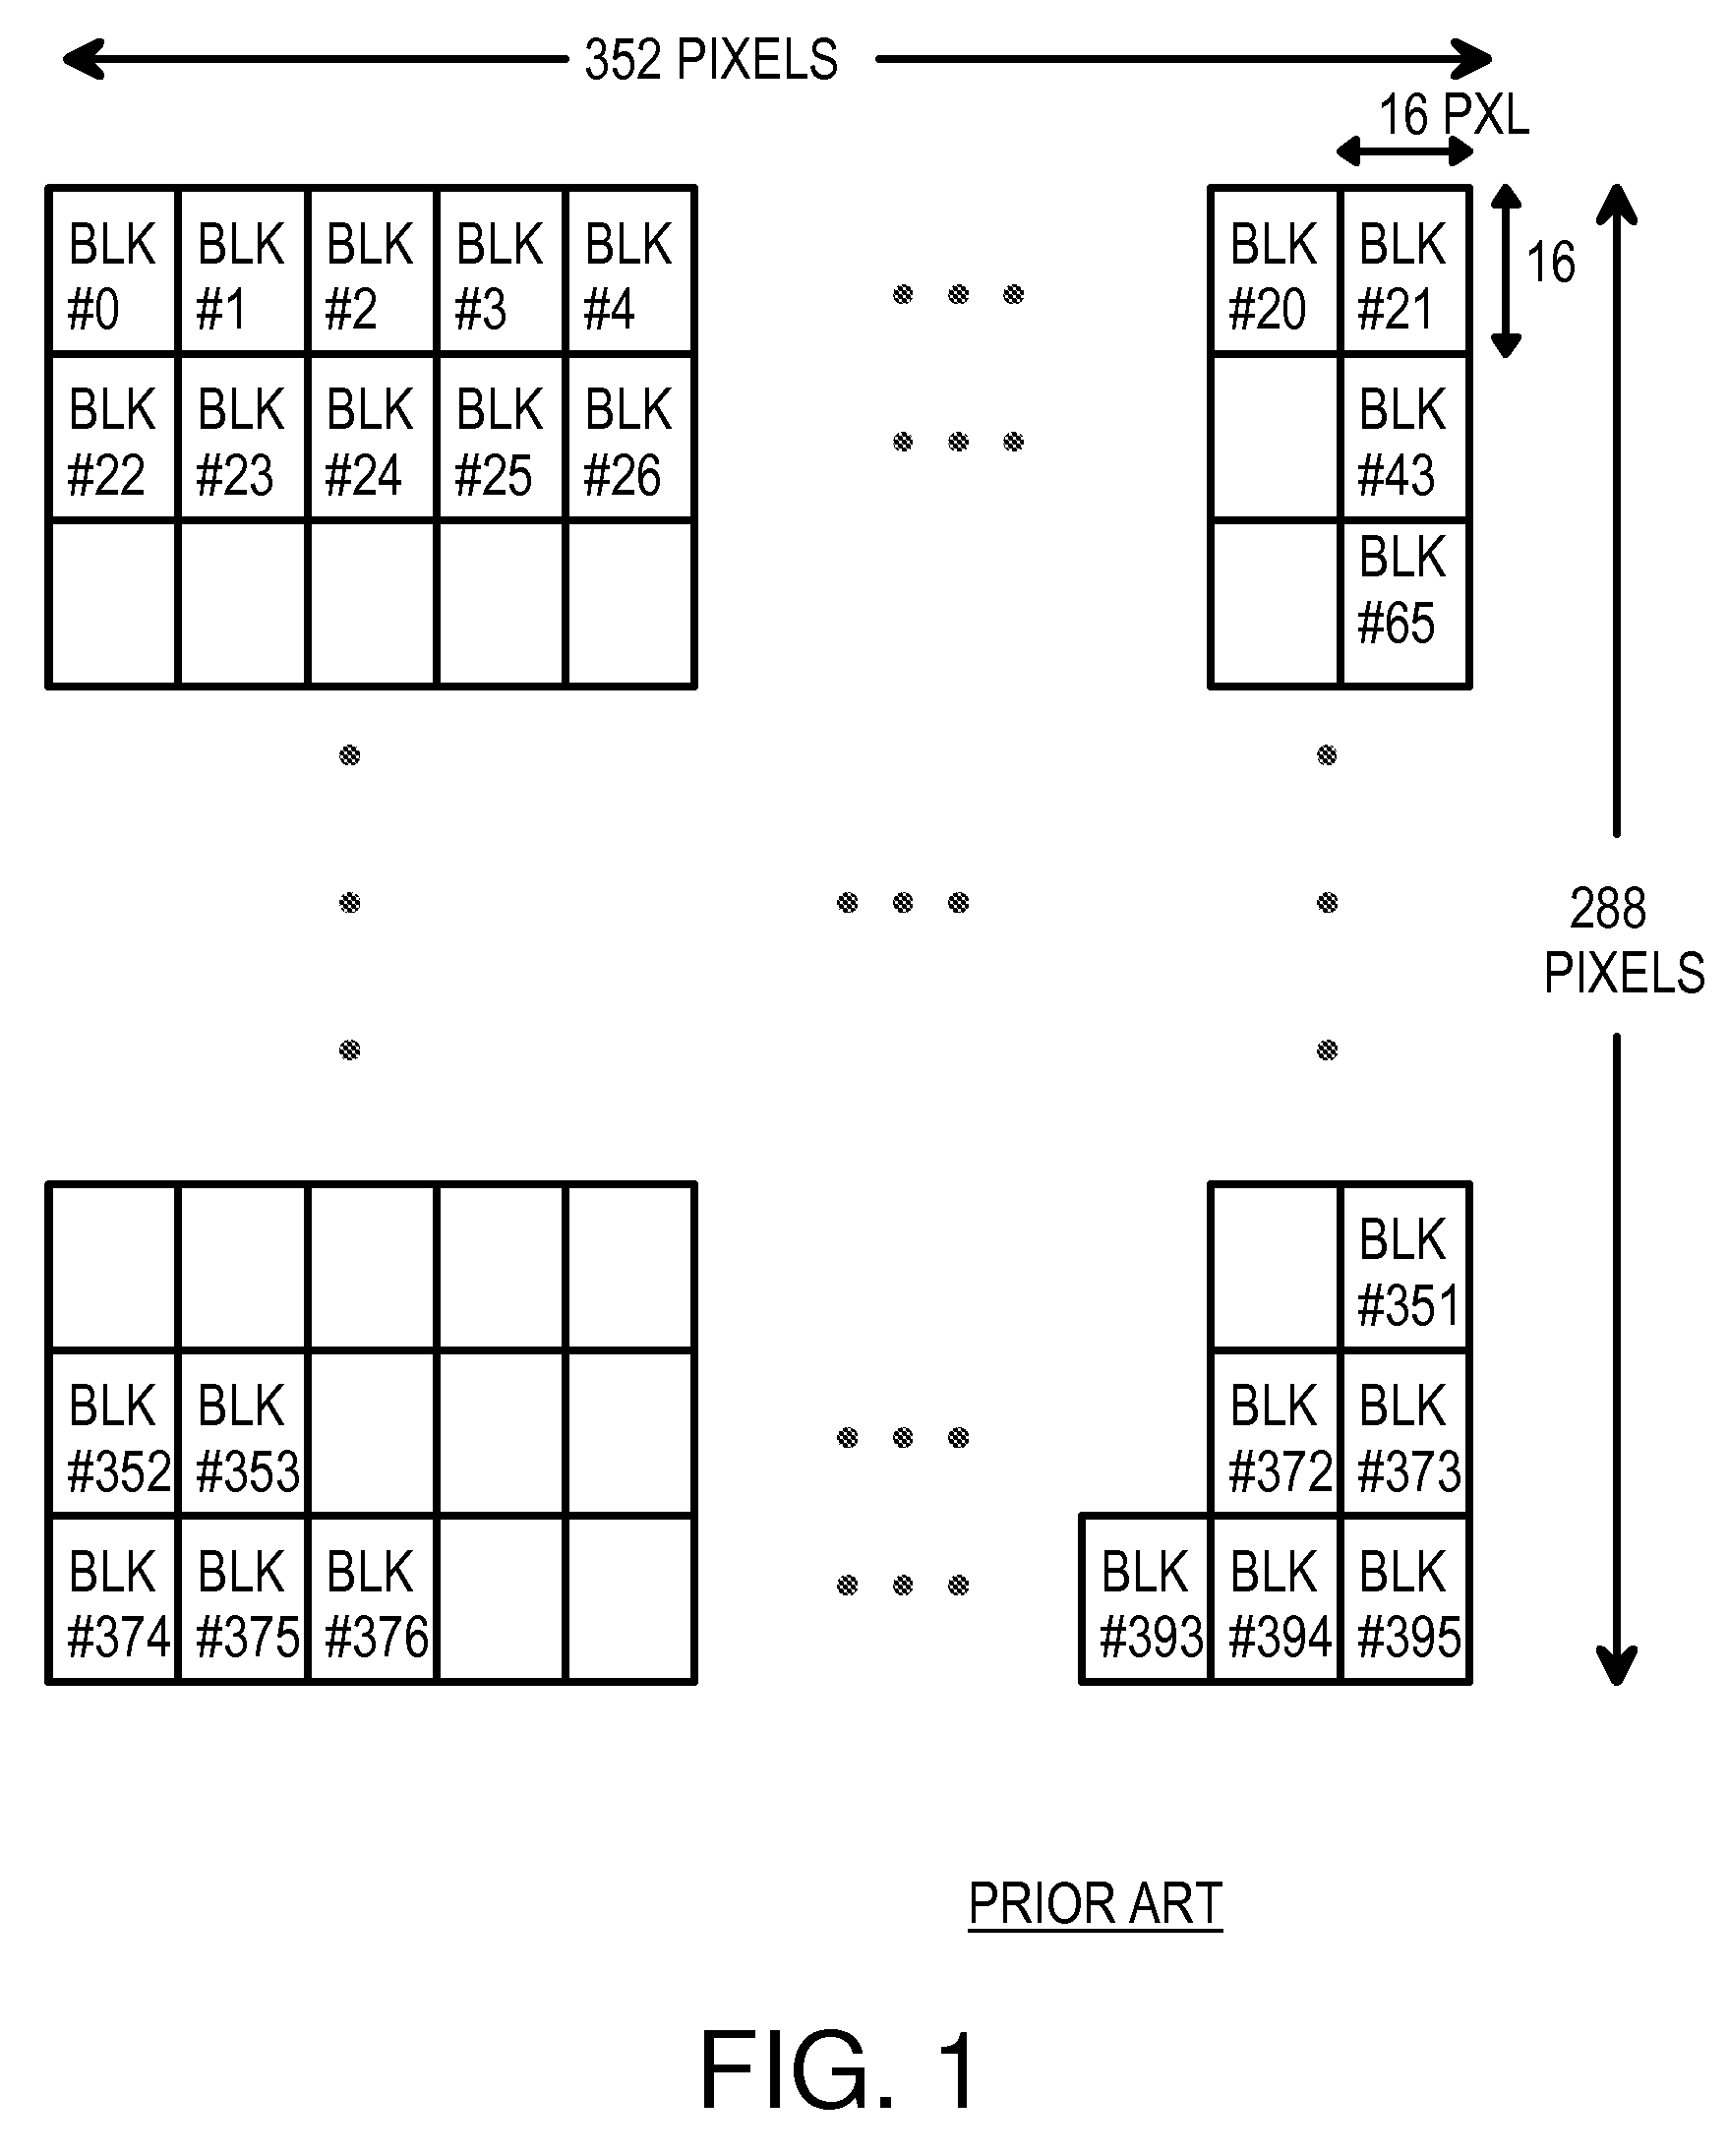 Multi-Directional Motion Estimation Using Parallel Processors and Pre-Computed Search-Strategy Offset Tables